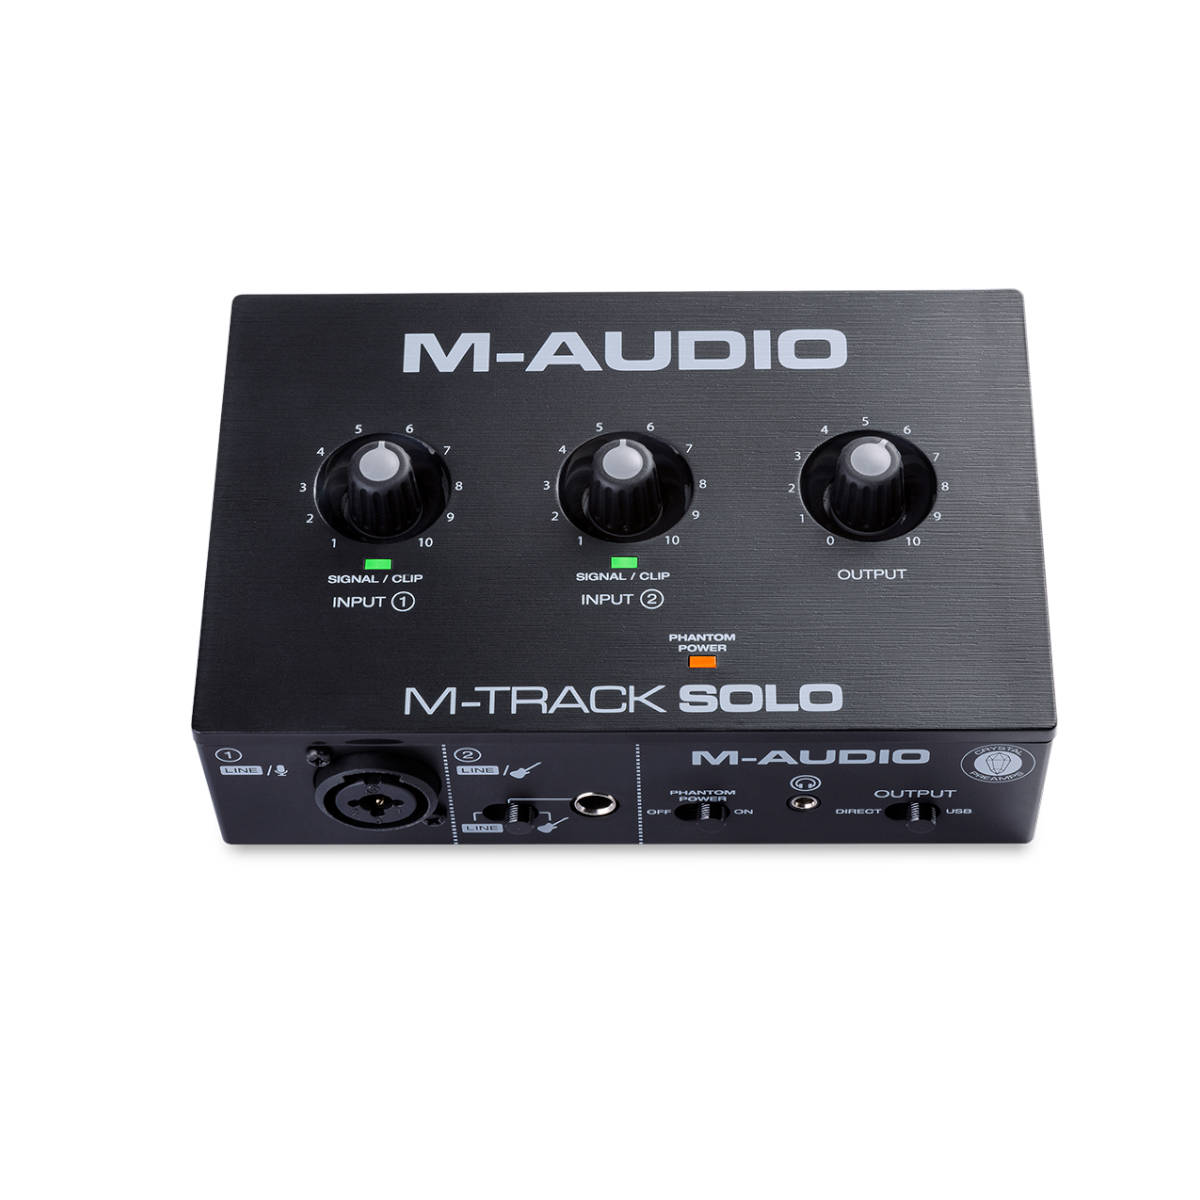 M-Audio - Complete Recording Bundle - USB Audio Interface, Microphone,  Shock mount, Cable, Headphones and Software Suite - AIR 192